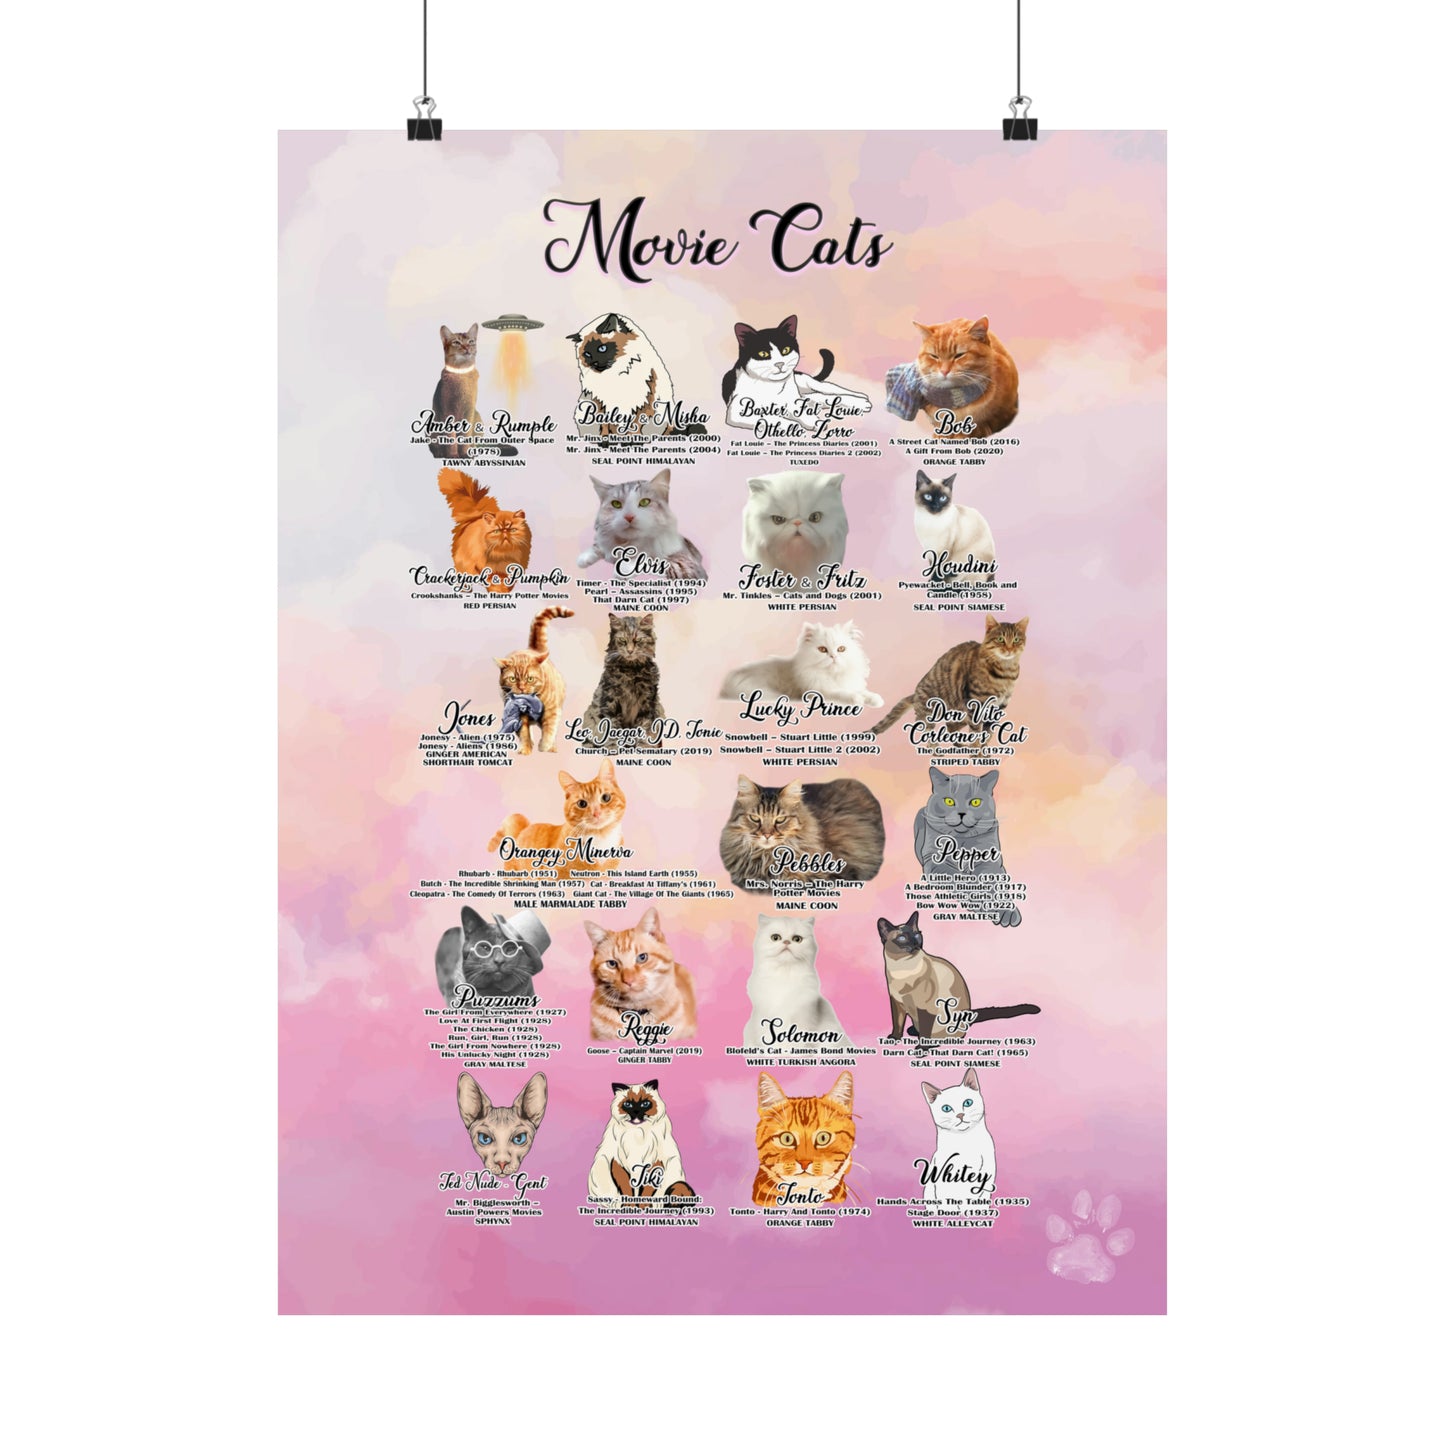 Movie Cats Poster